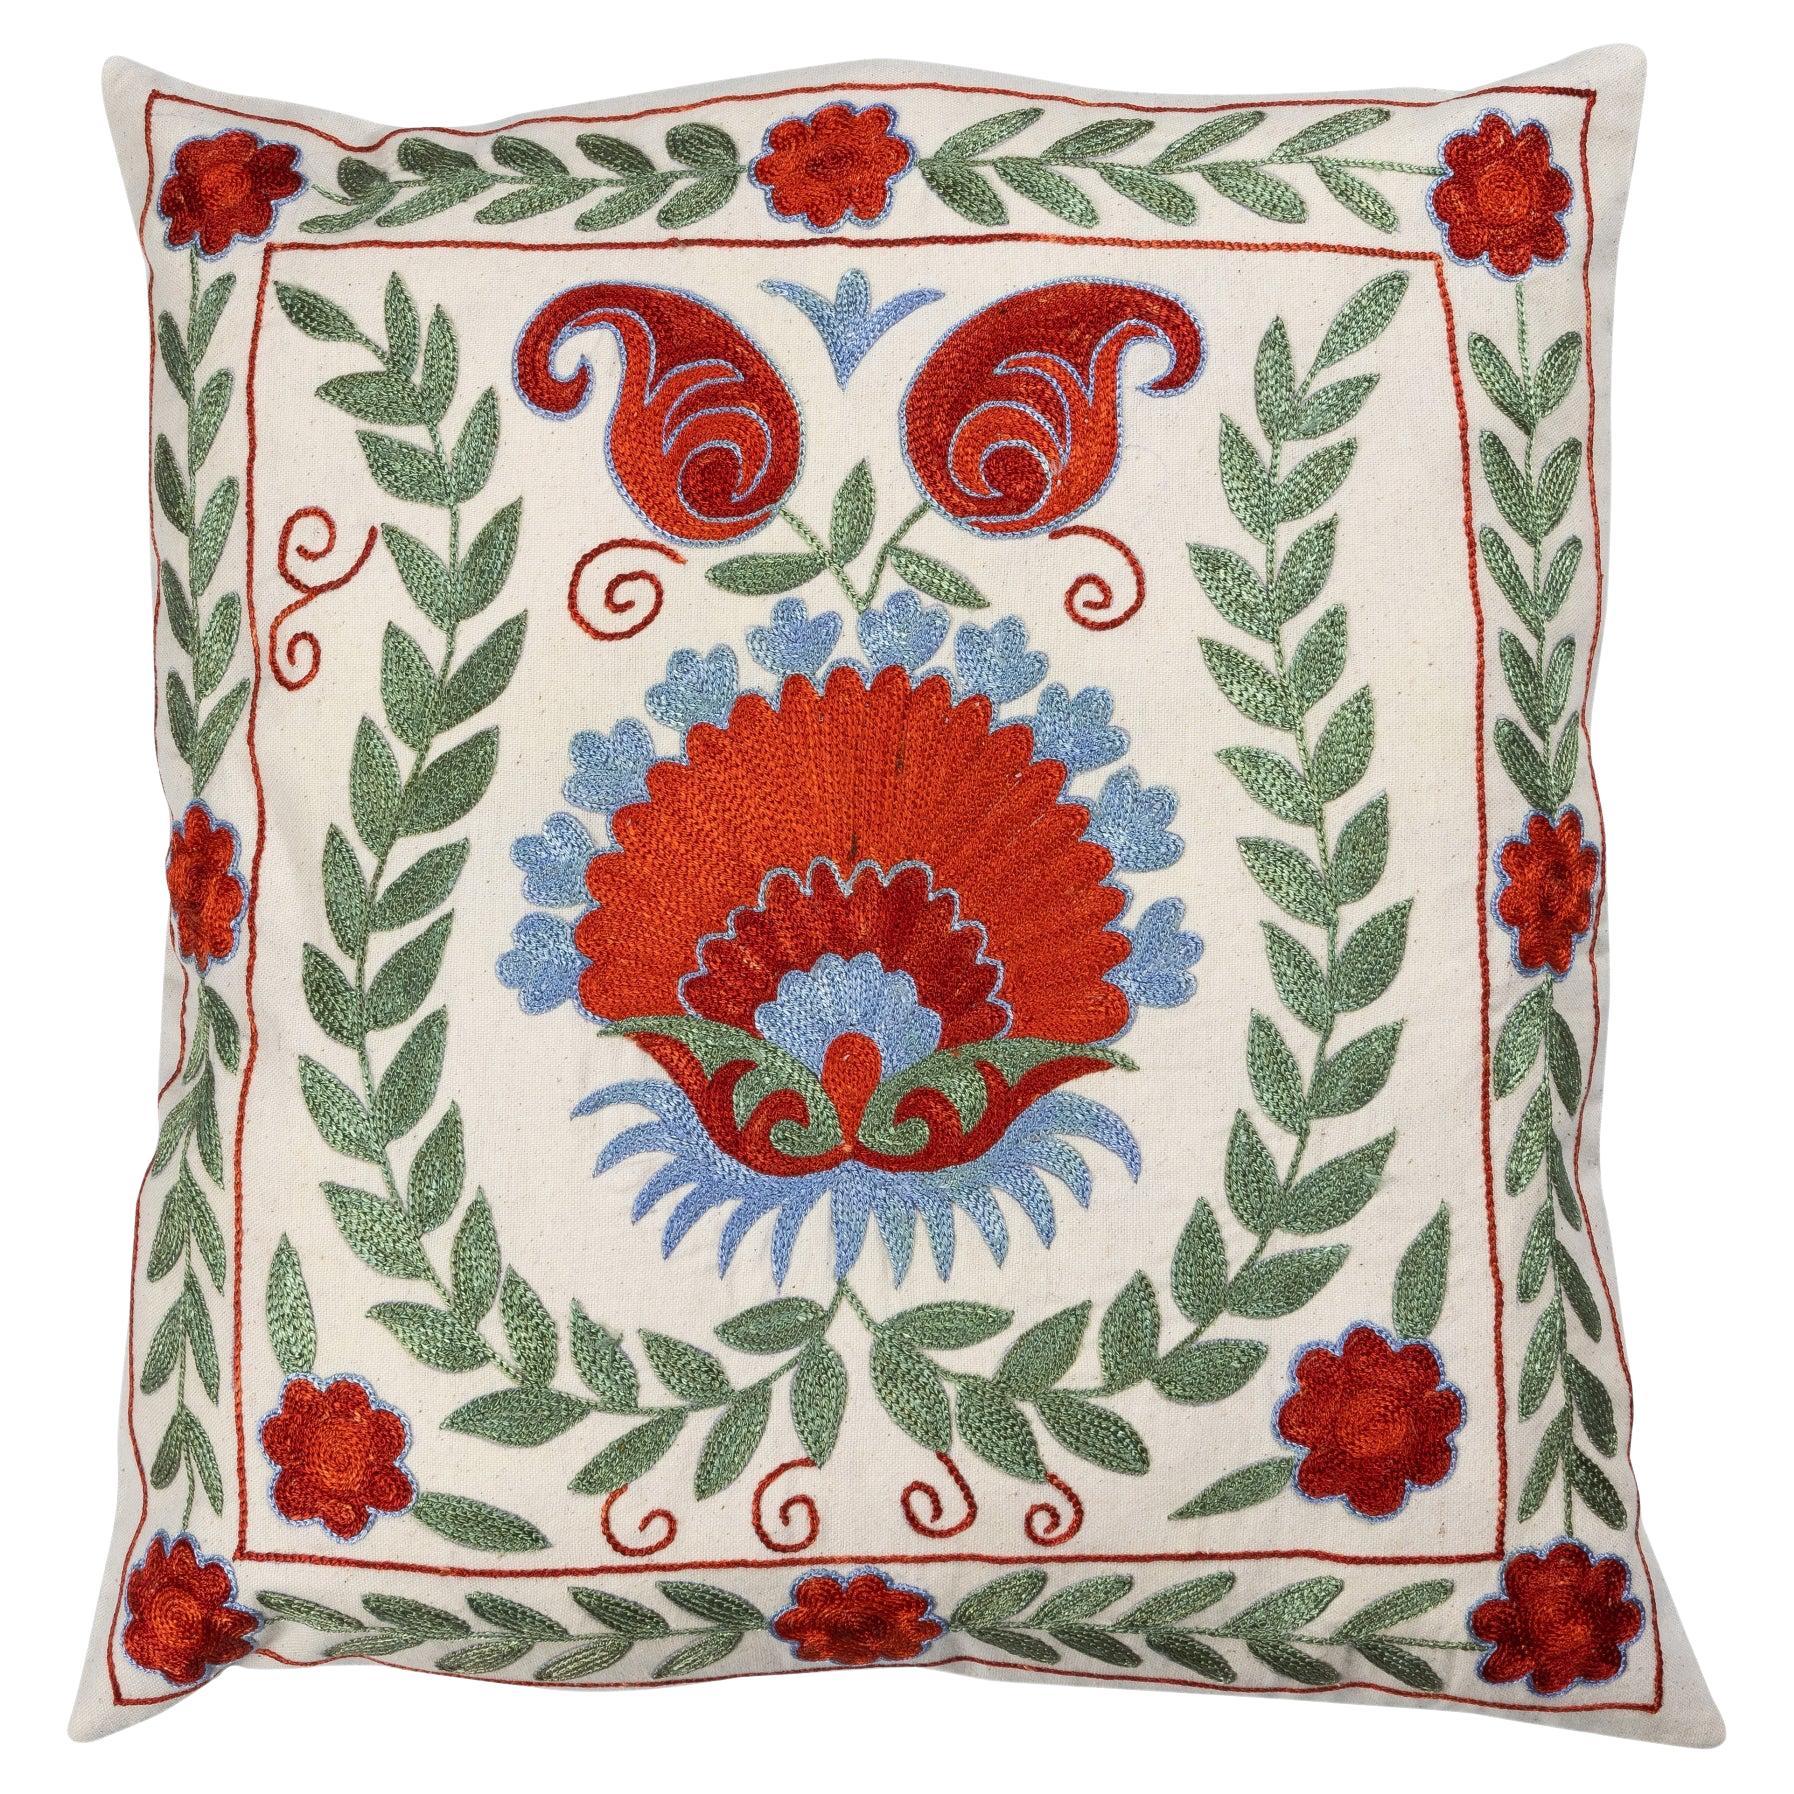 19"x19" Gorgeous Cushion Cover. Throw Pillow, Silk Embroidery Suzani Lace Pillow For Sale